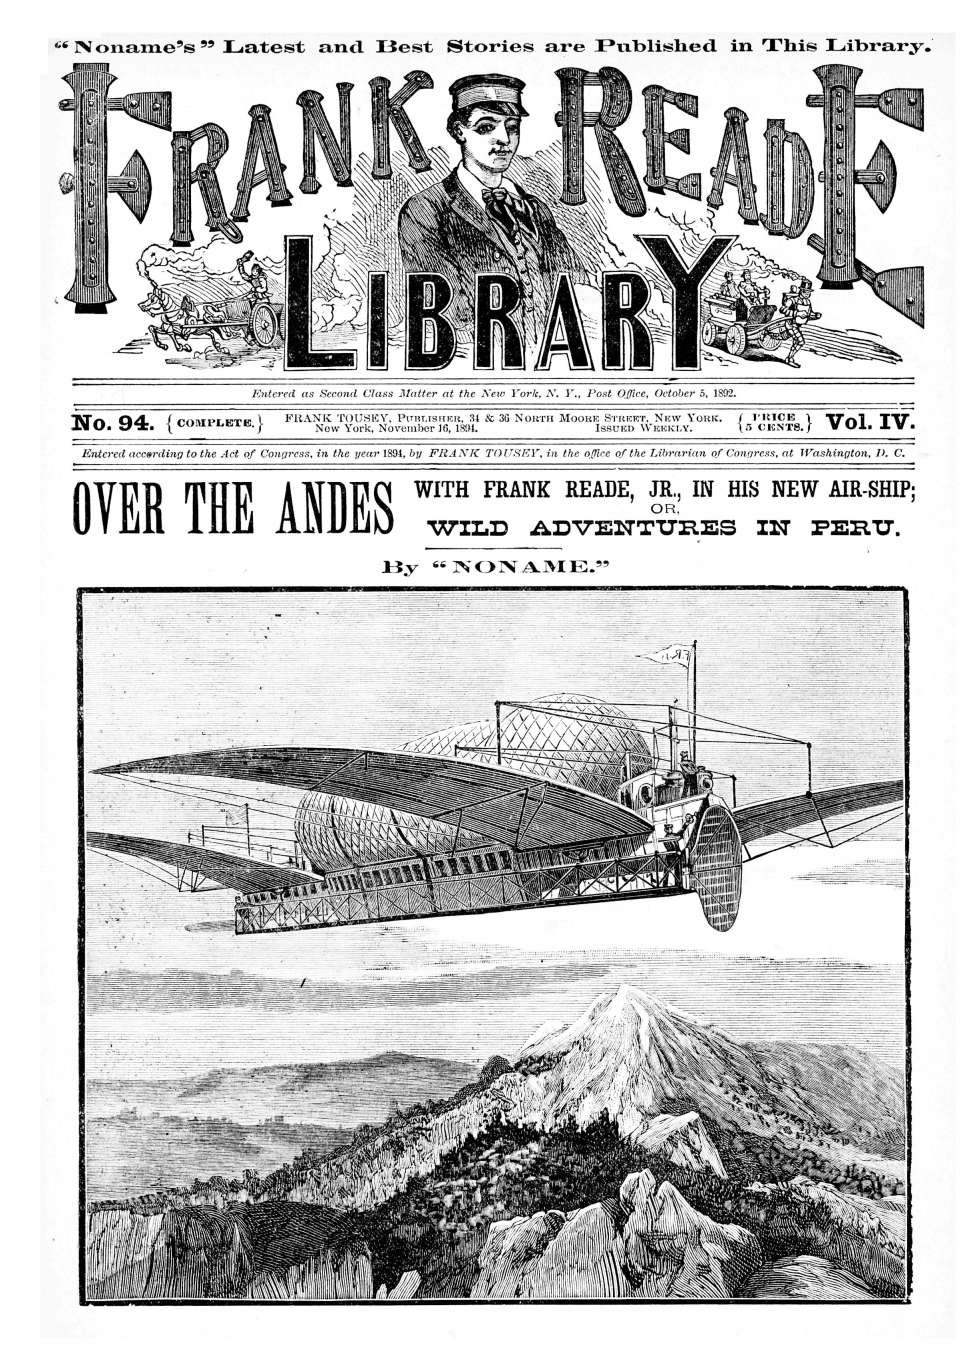 Comic Book Cover For v04 94 - Over the Andes with Frank Reade, Jr., in His New Air-Ship